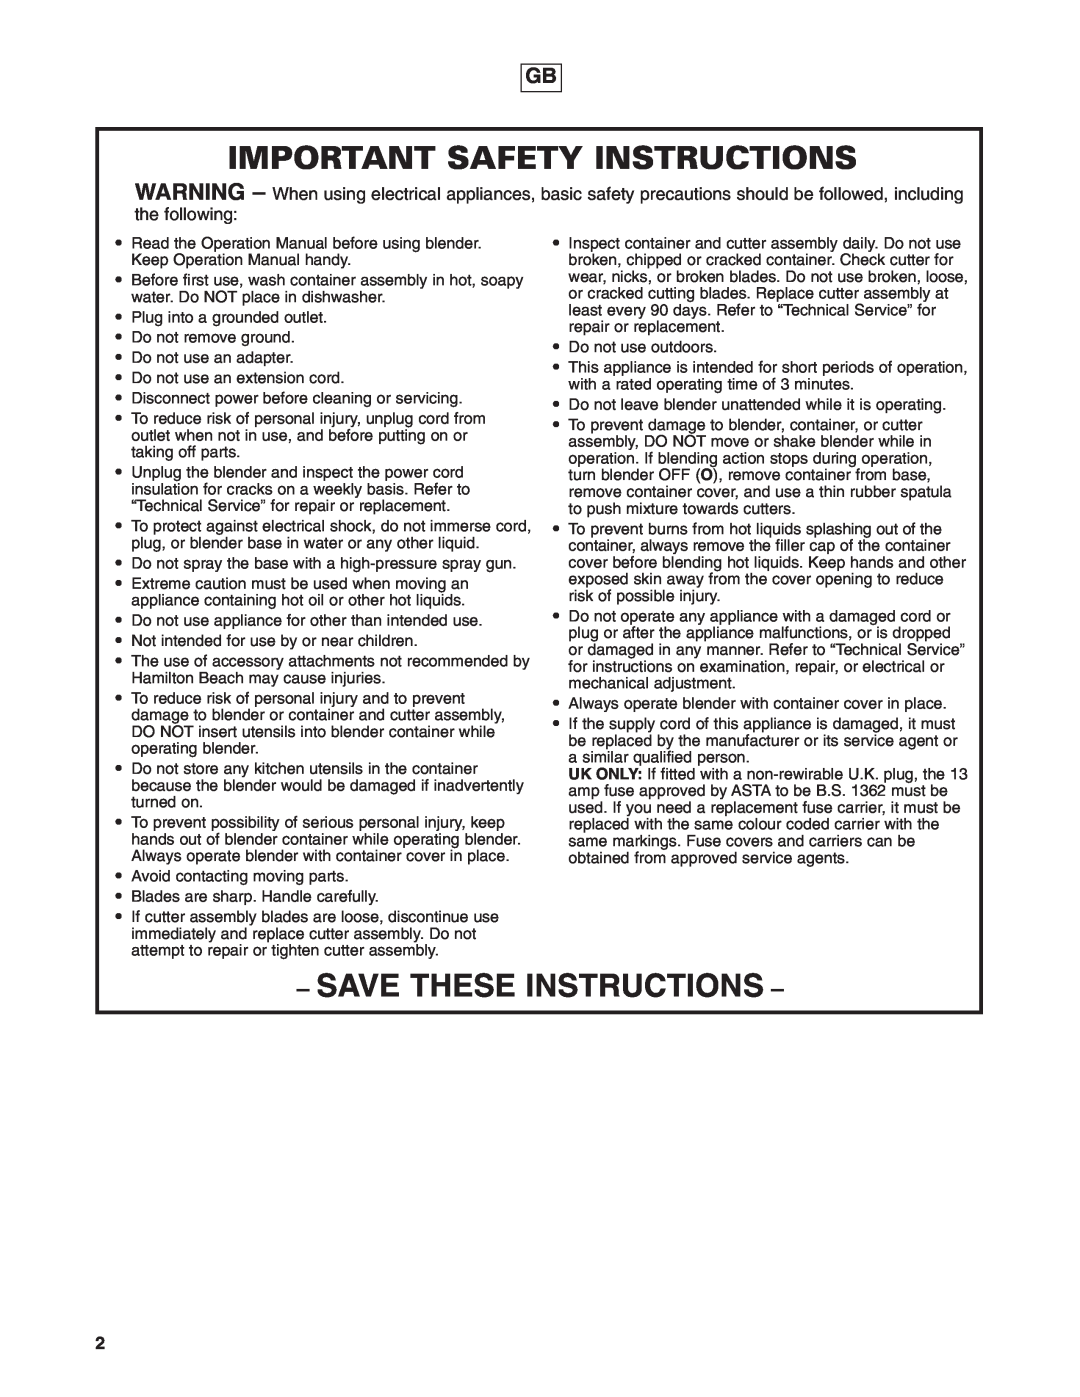 Hamilton Beach 908 Series operation manual Important Safety Instructions, Save These Instructions 